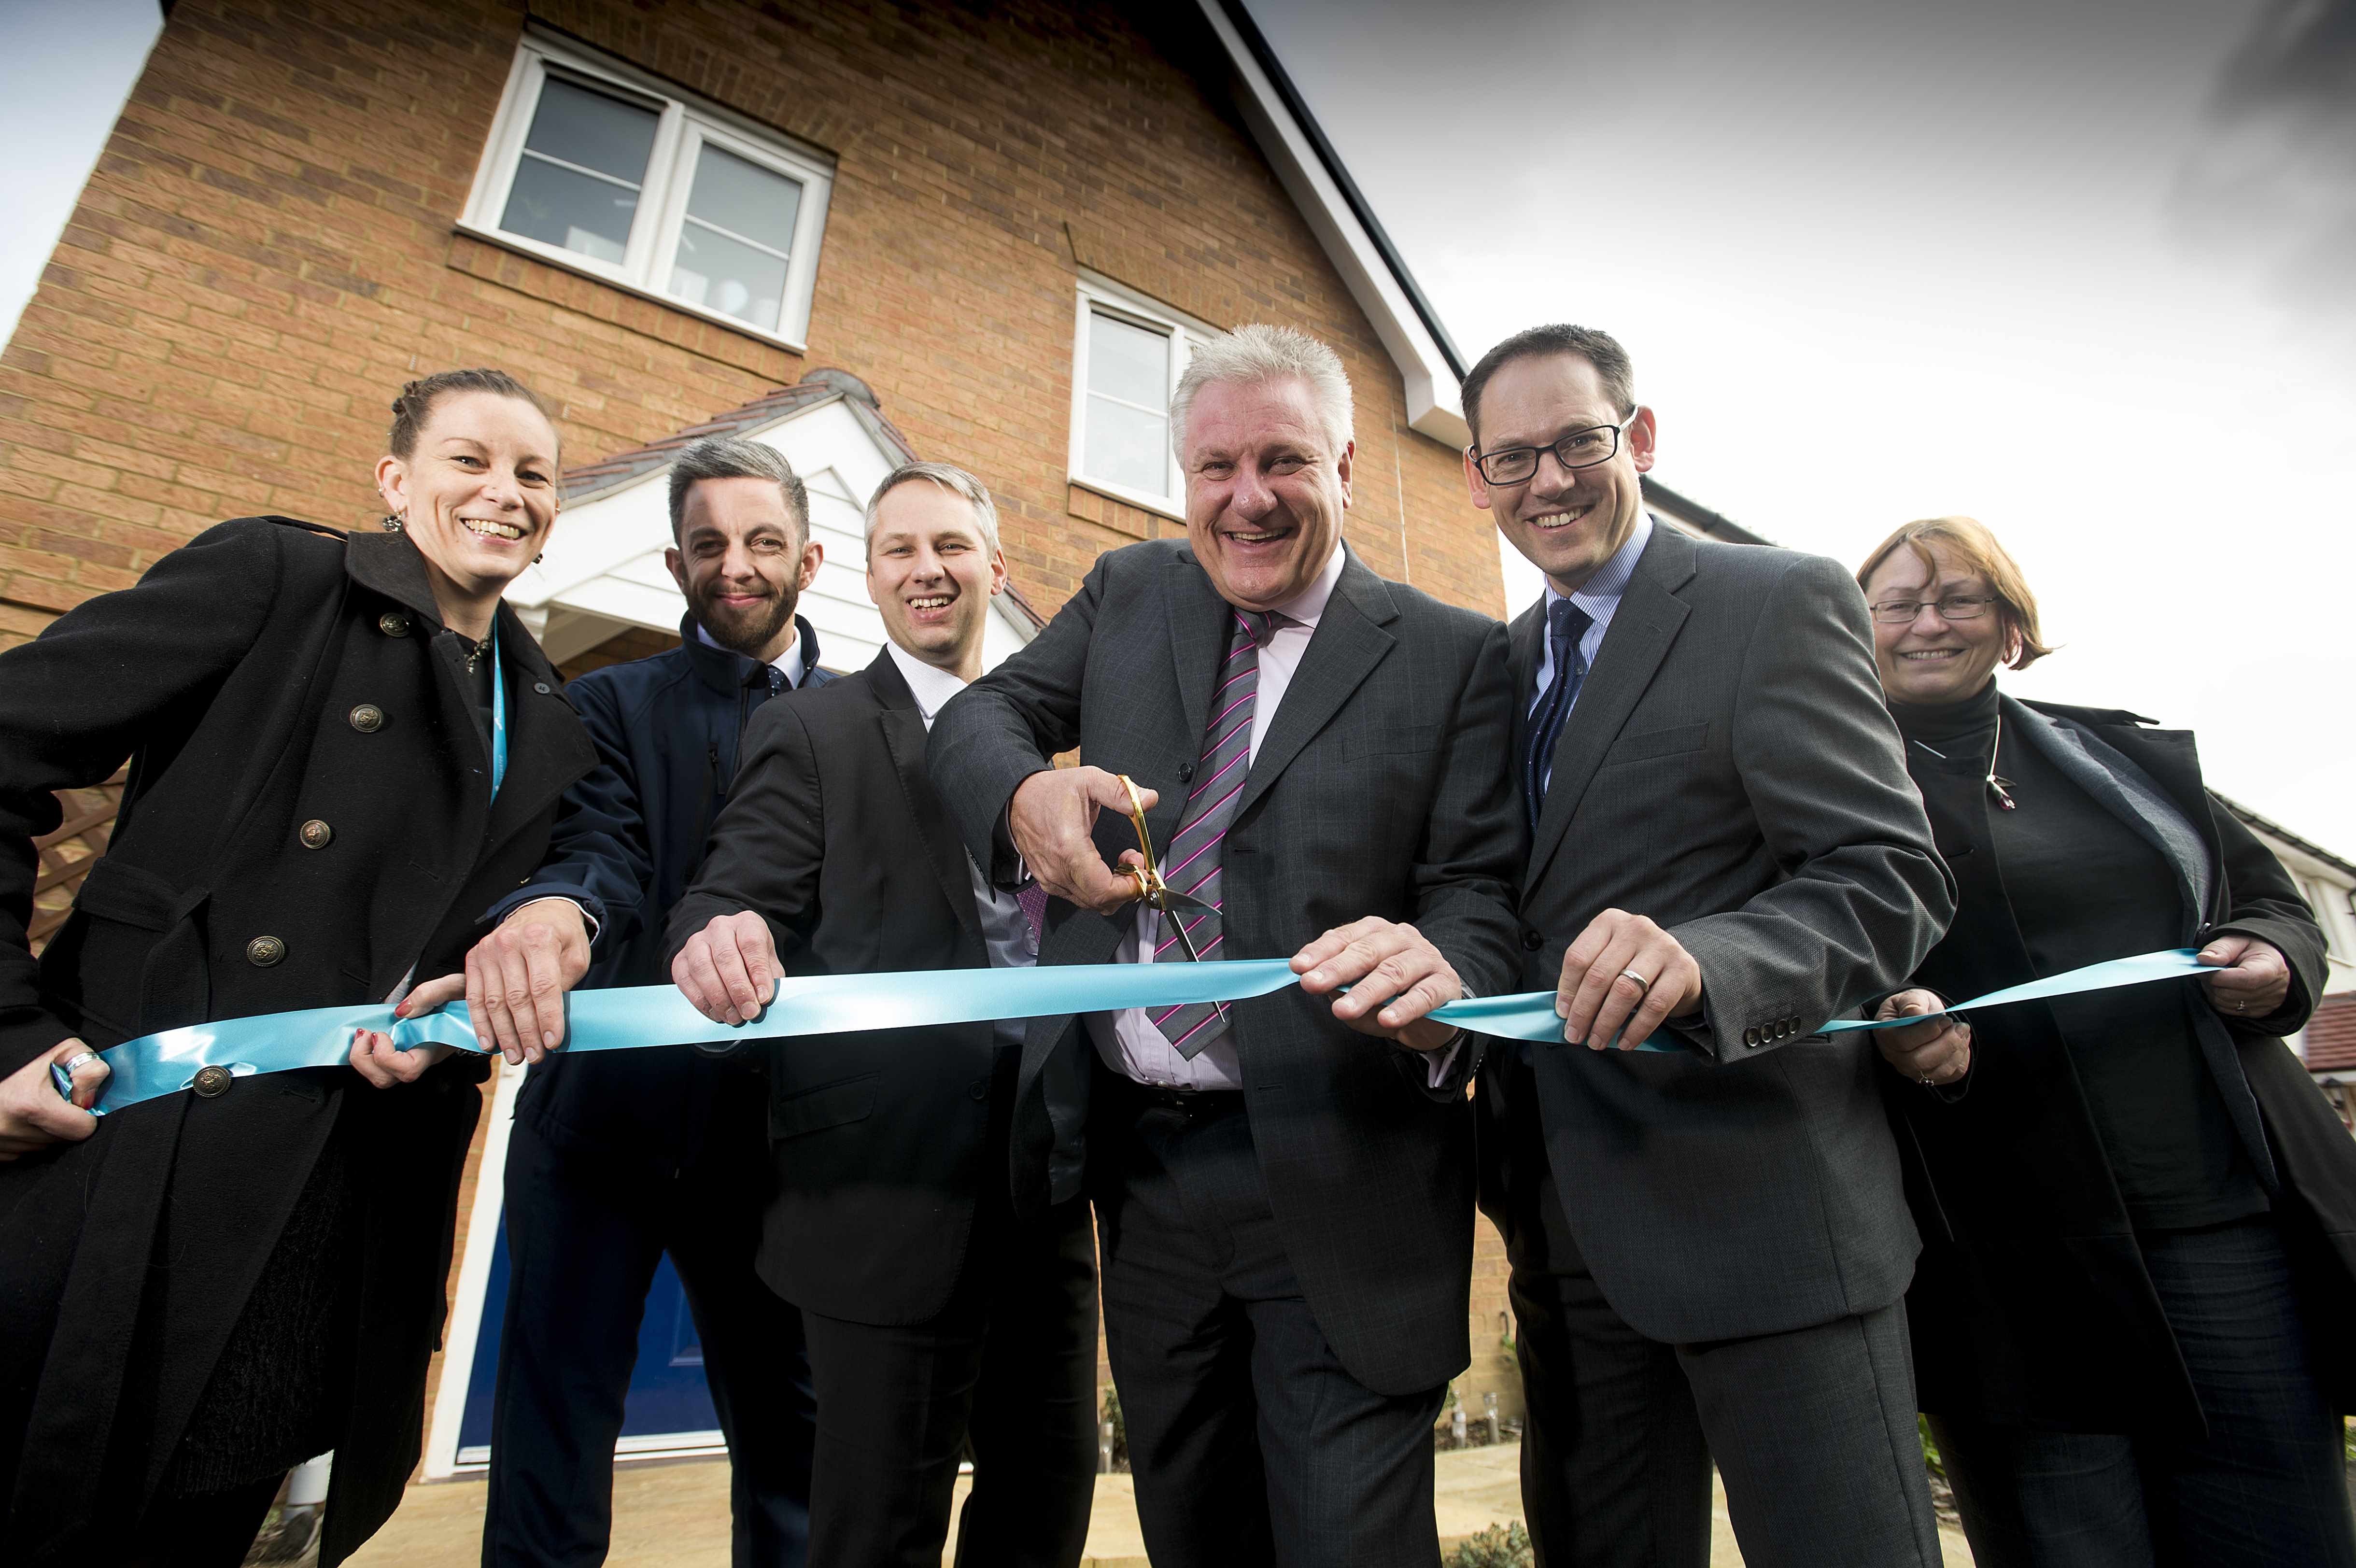 New Stonewater homes make Yapton village more affordable for local people